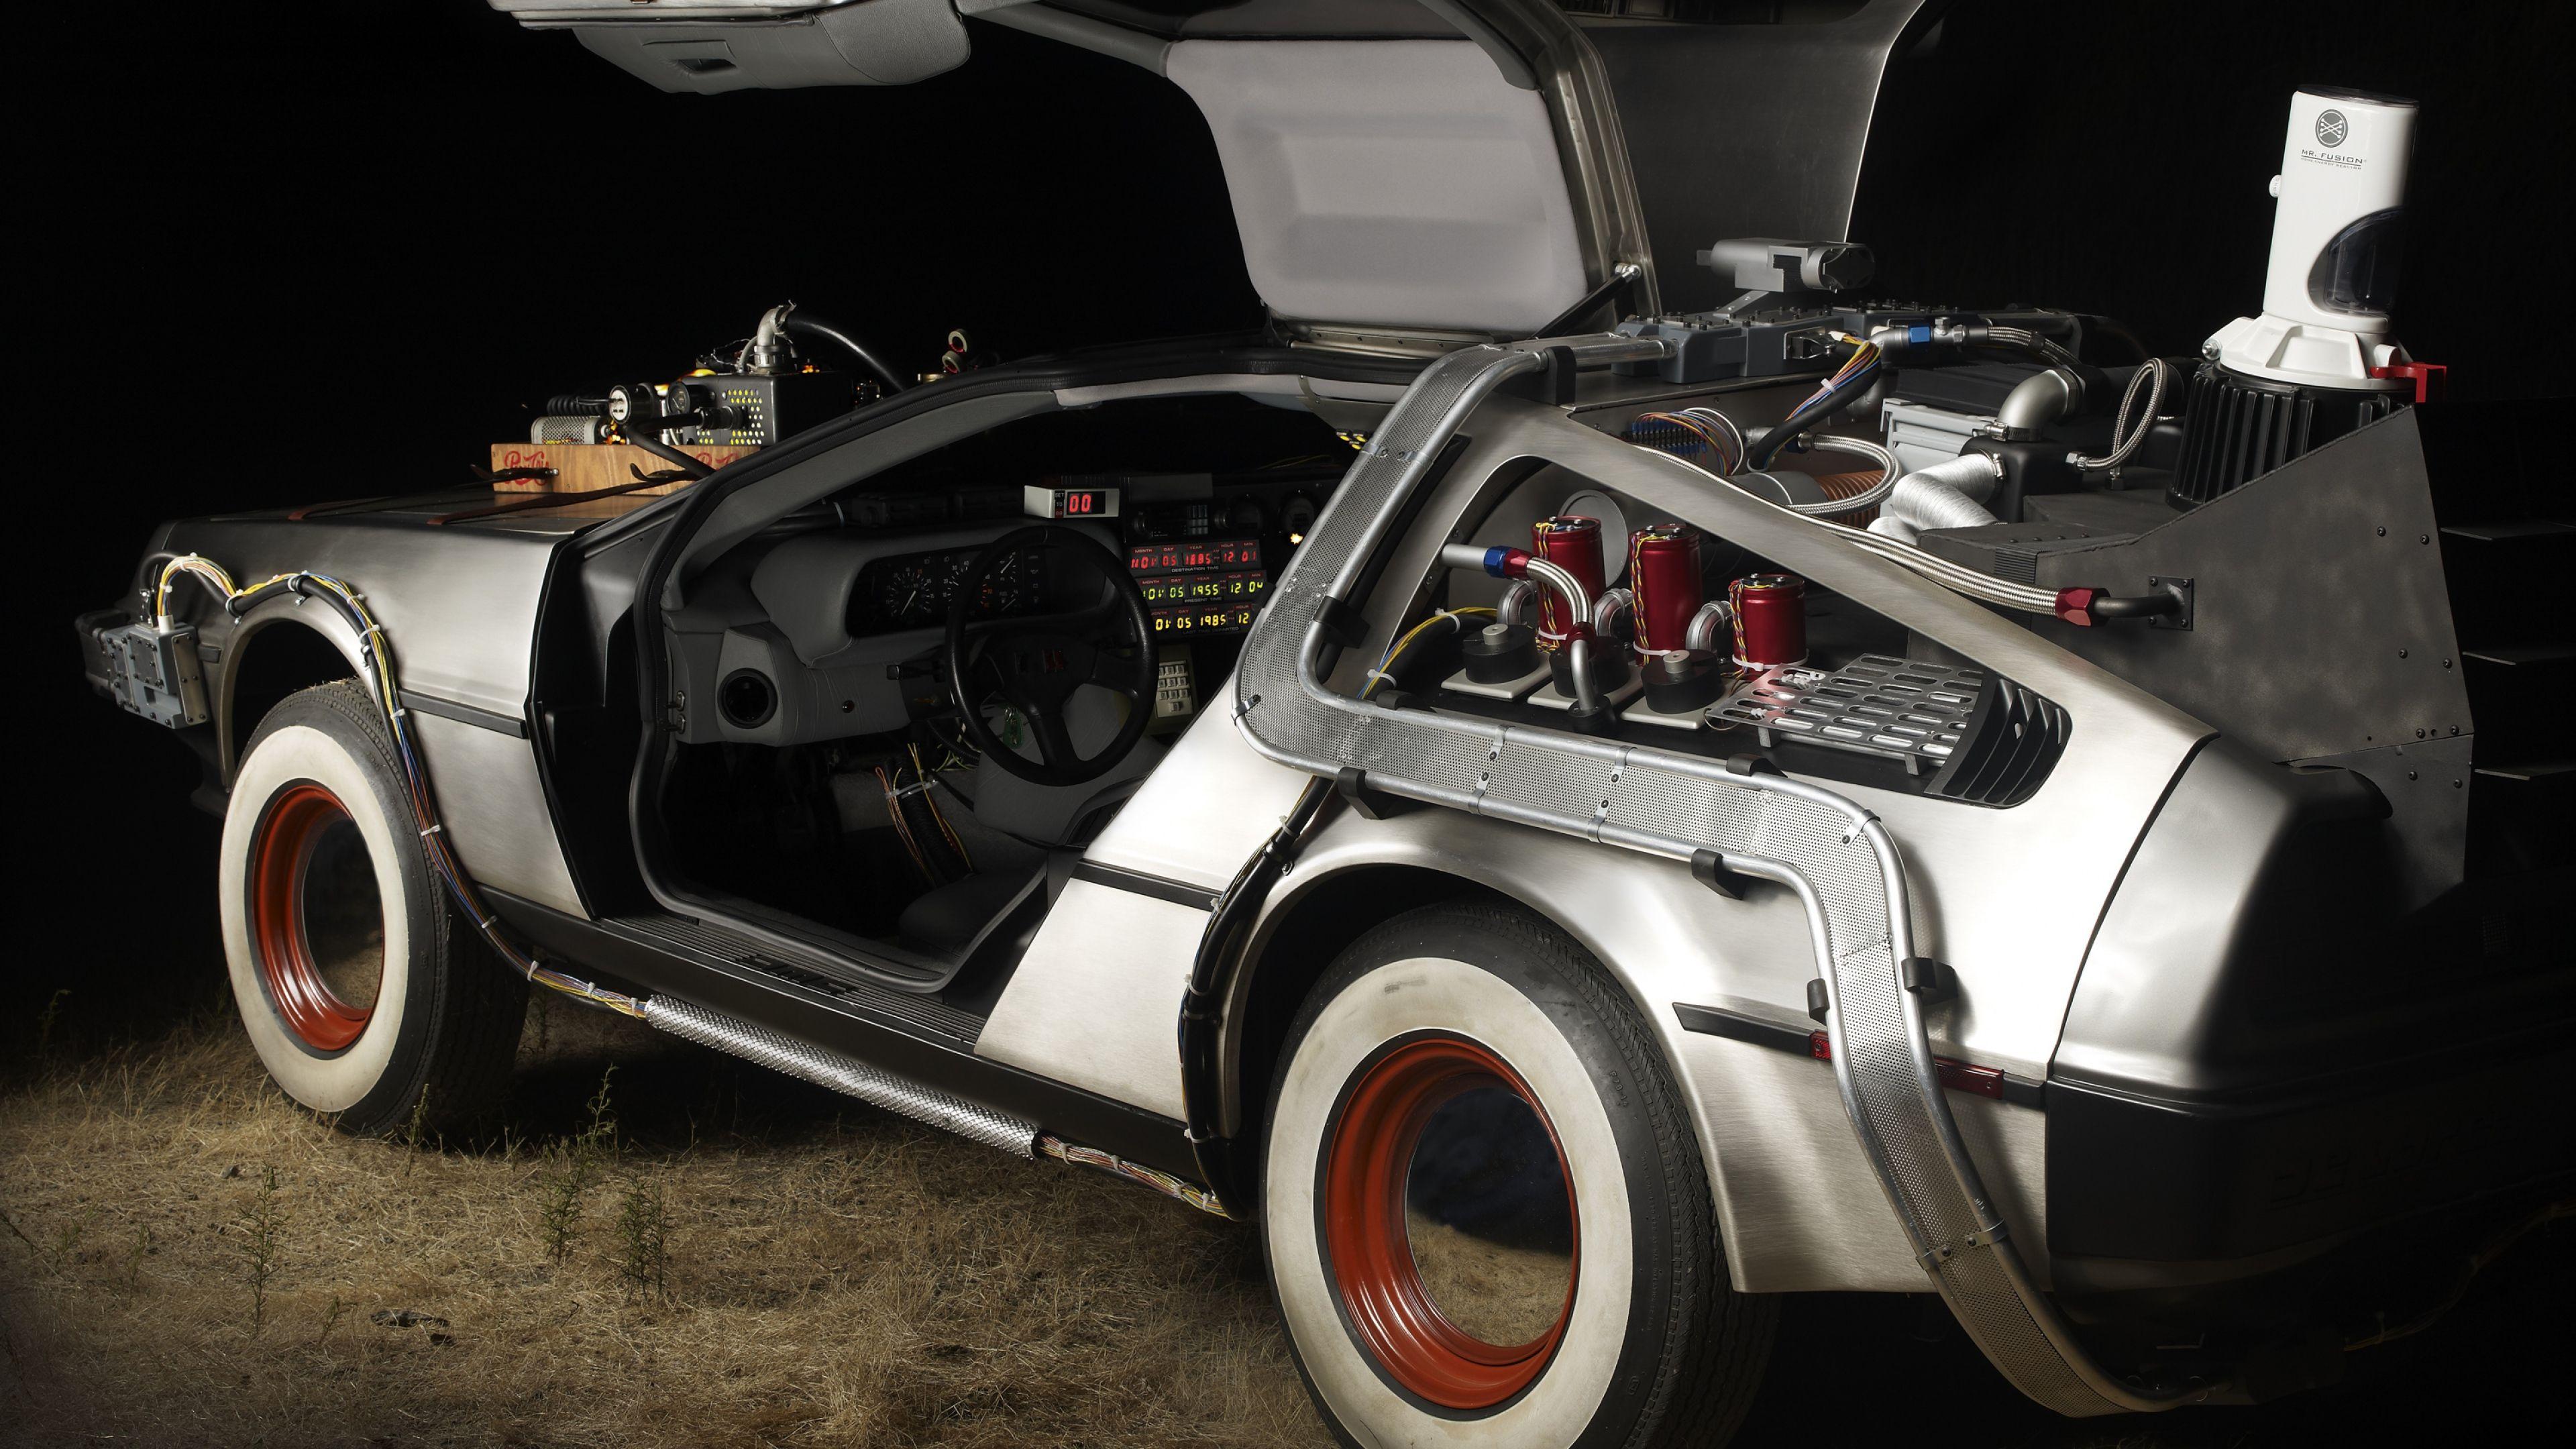 Download Wallpaper 3840x2160 Back to the future, Car, Time machine